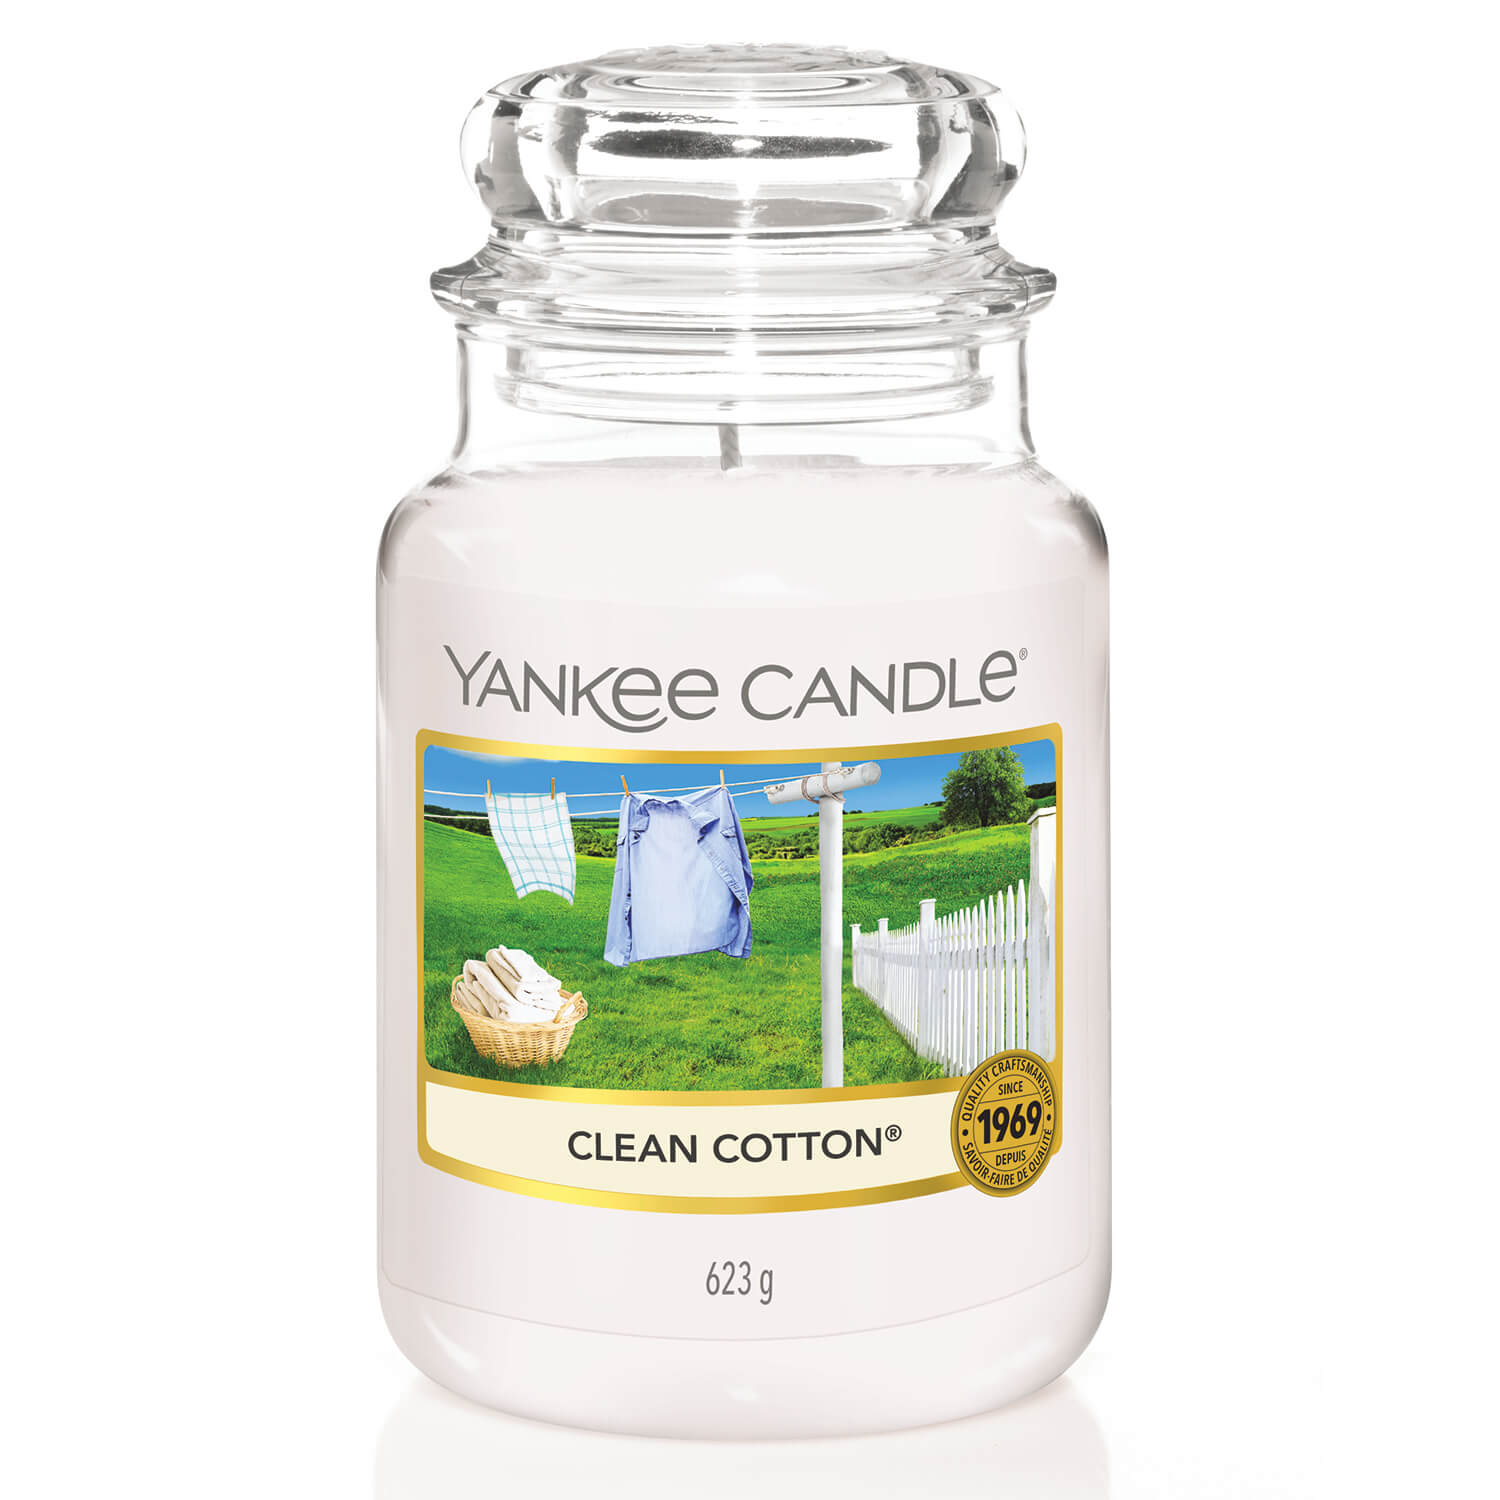 Yankee Candle Large Jar - Clean Cotton 1 Shaws Department Stores